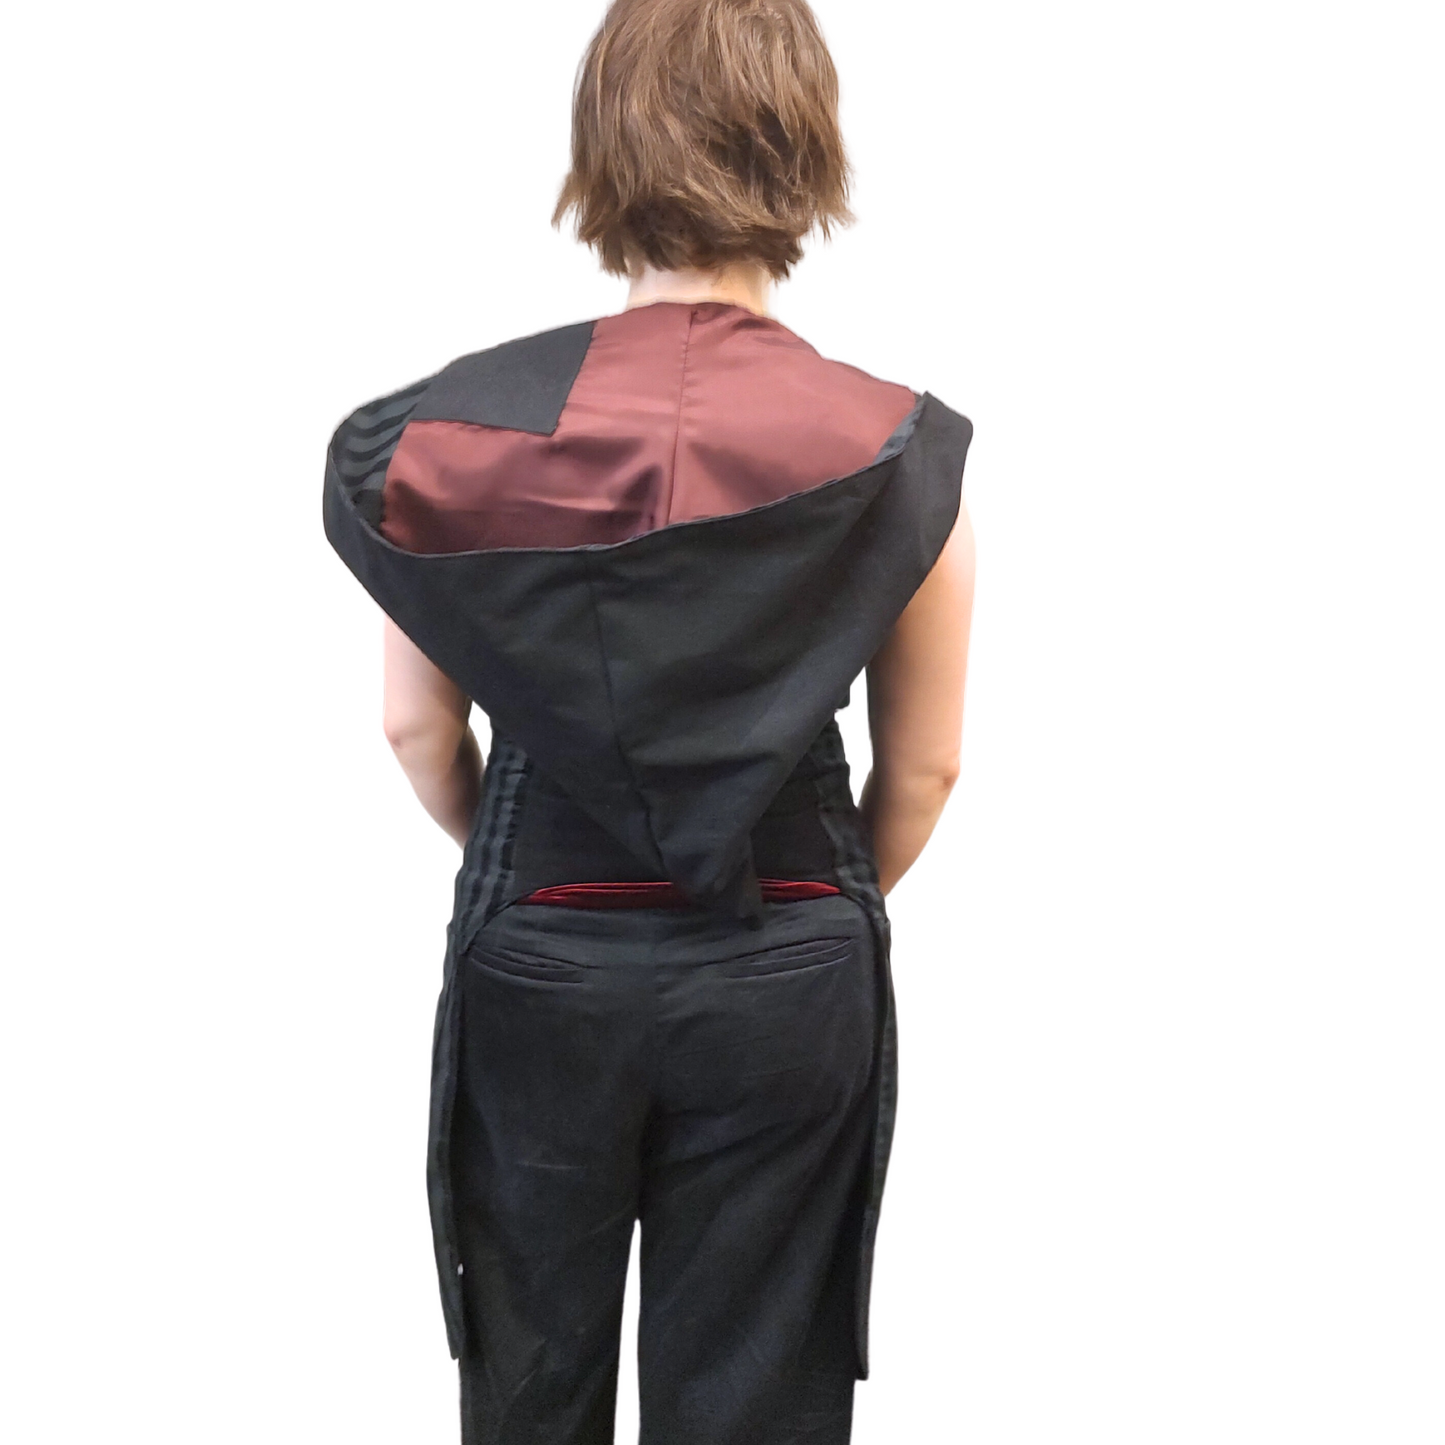 The VM Holster Vest with Detachable Hood